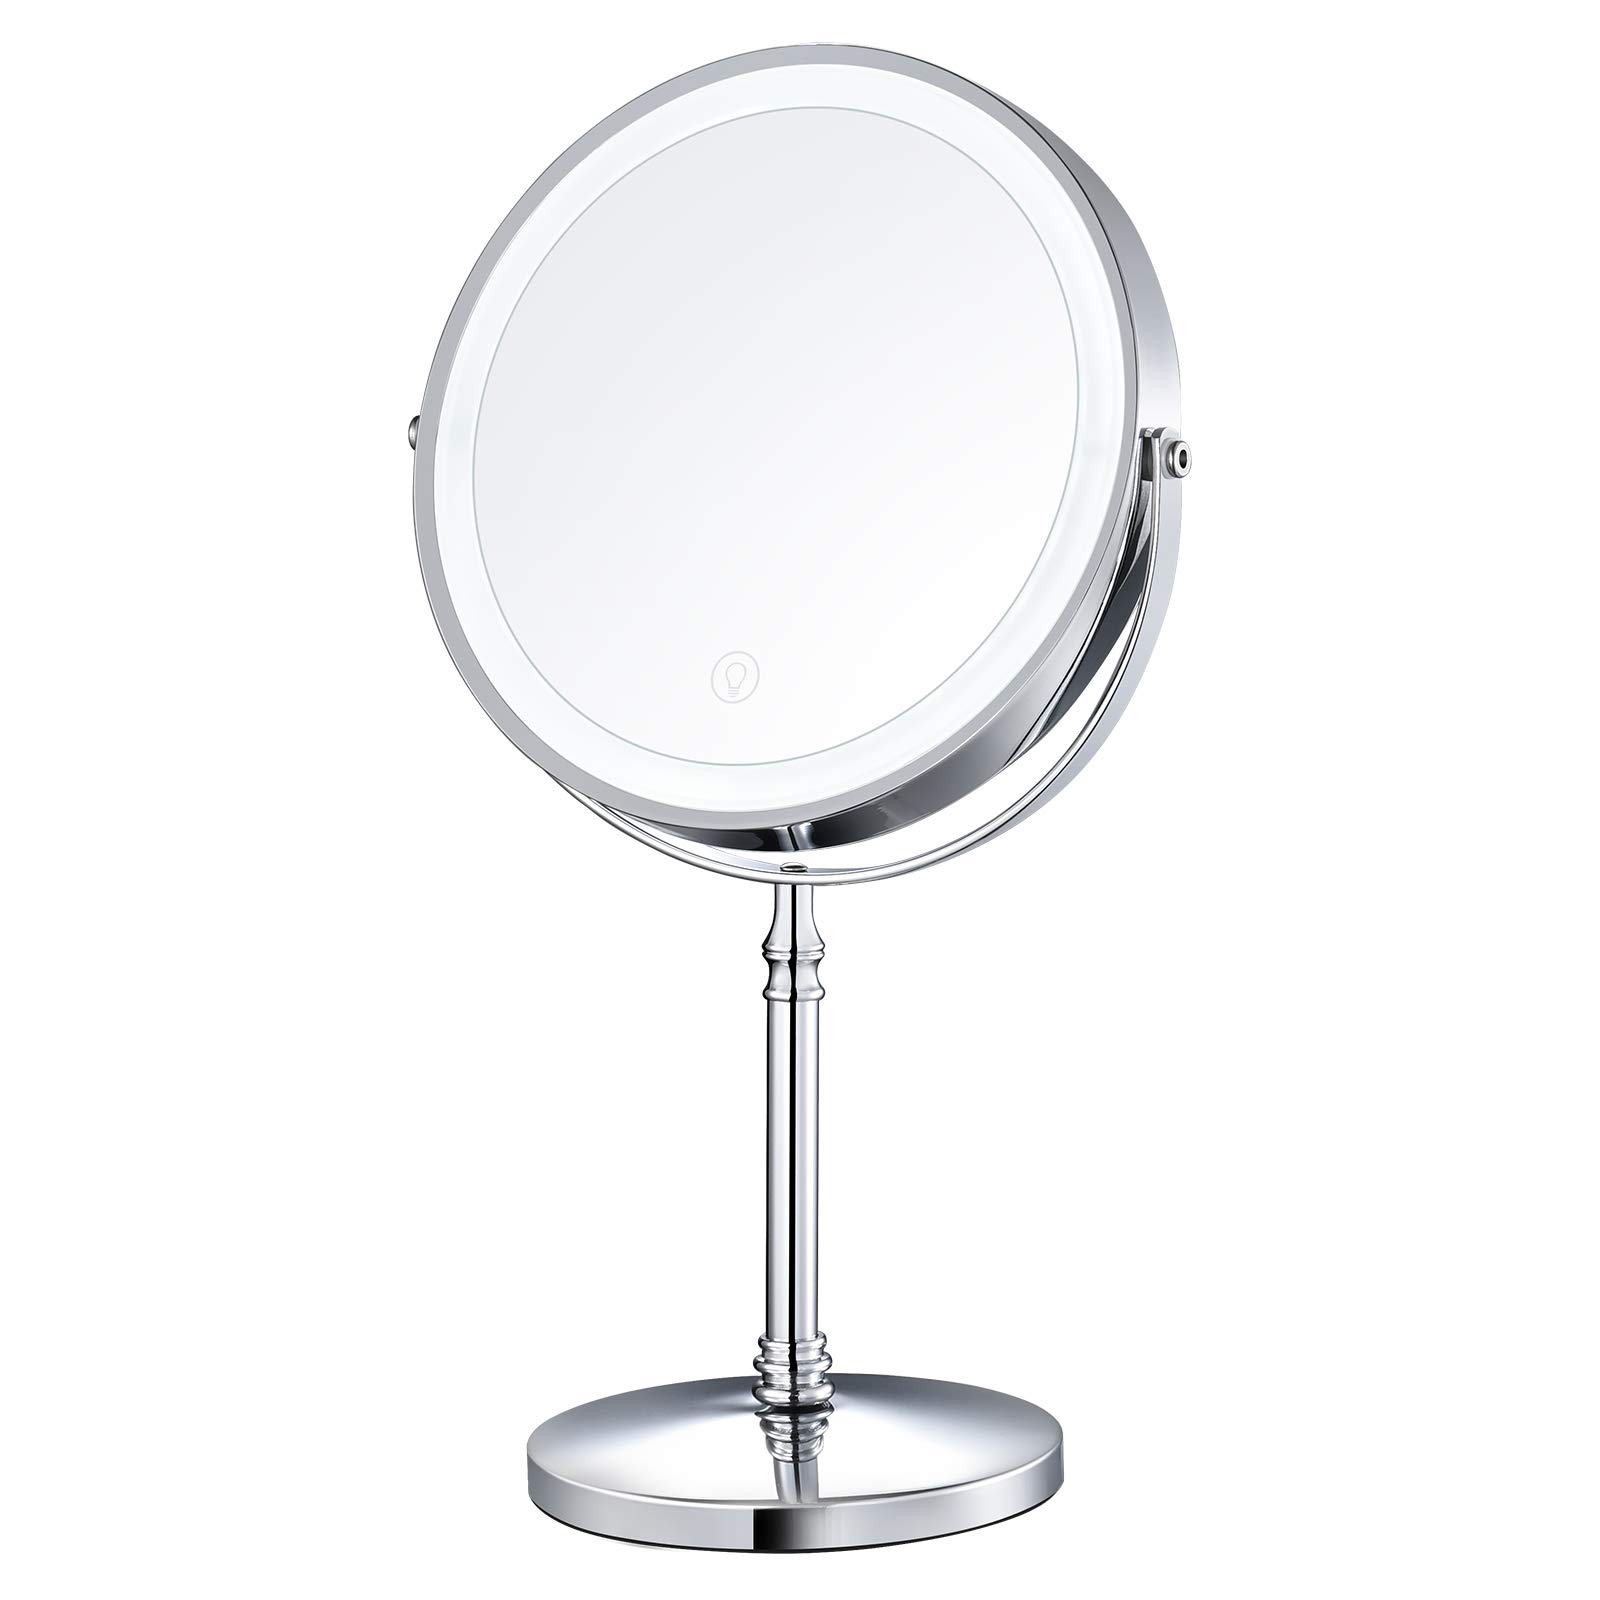 May Ilaw na Makeup Mirror Double Sided Dimmable Magnifying Rechargeable Adjustable Decor